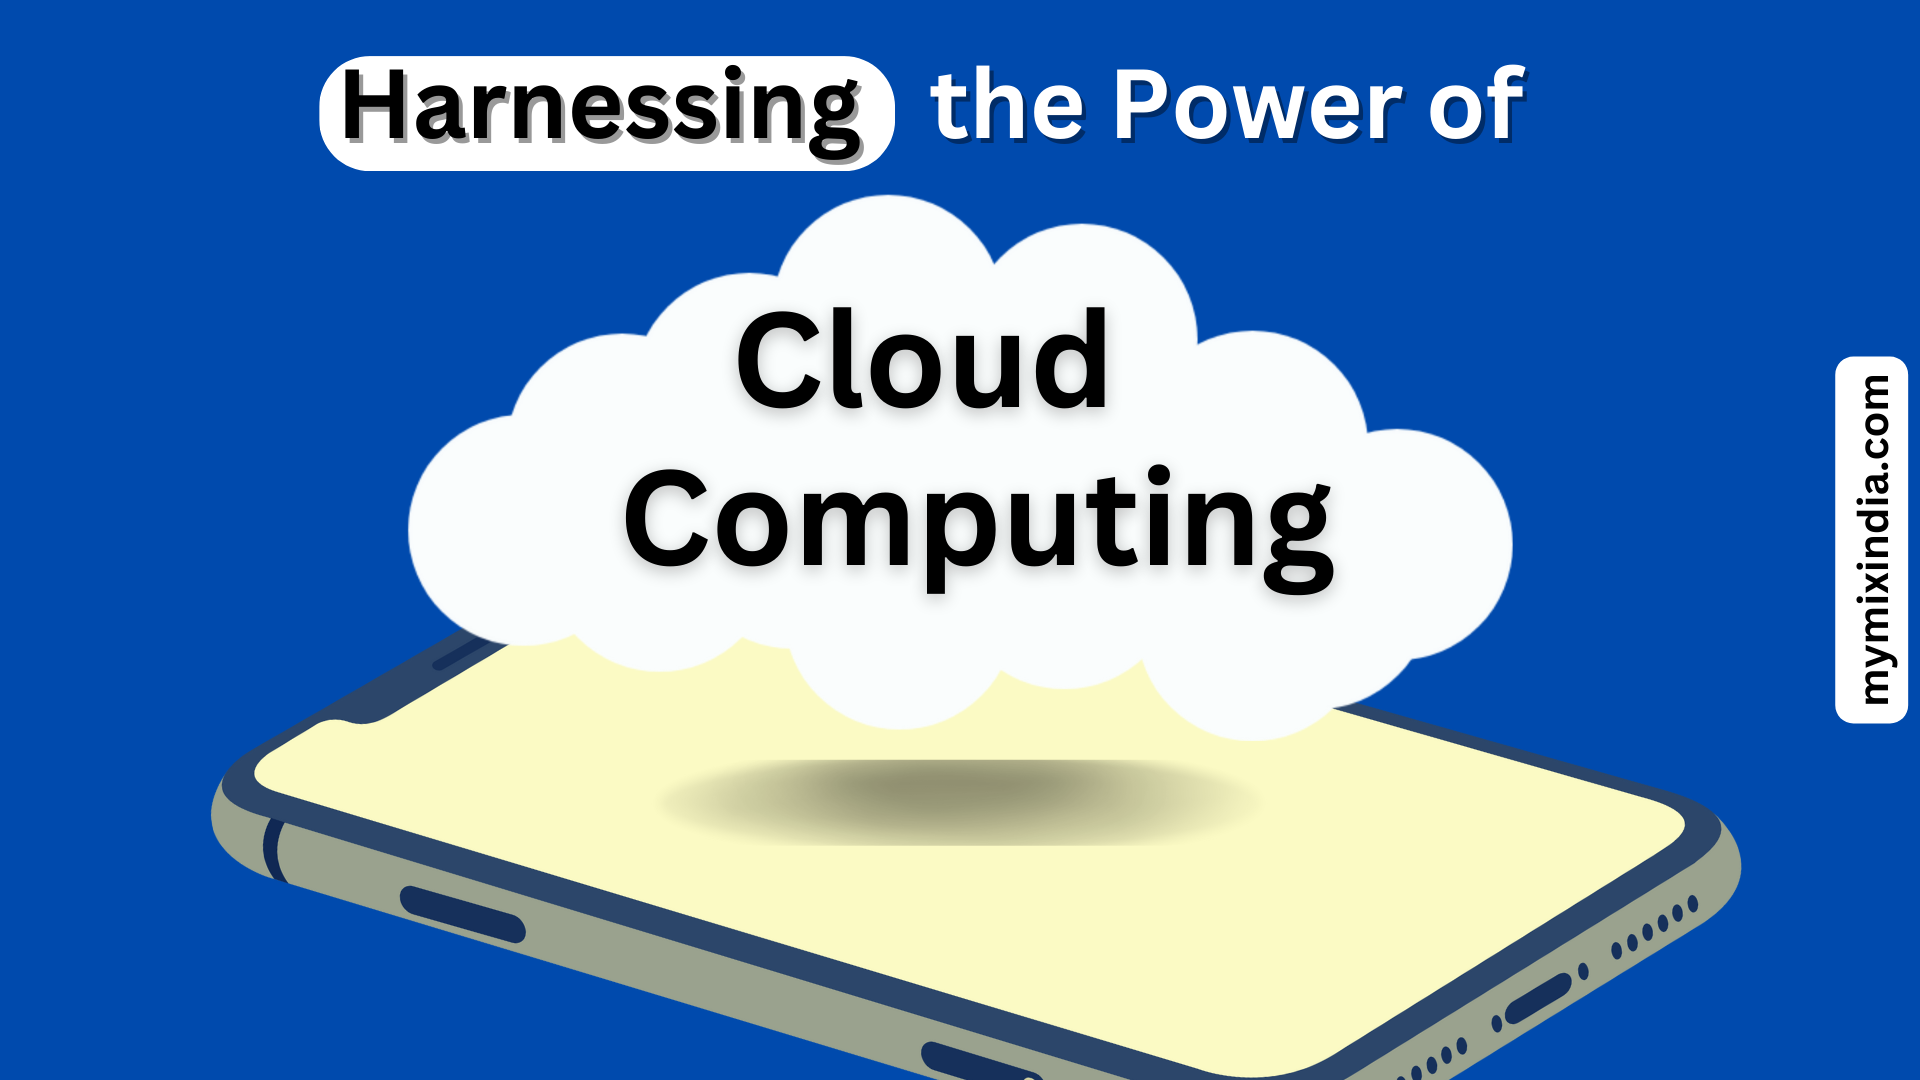 Harnessing-the-Power-of-Cloud-Computing-mymixindia.com